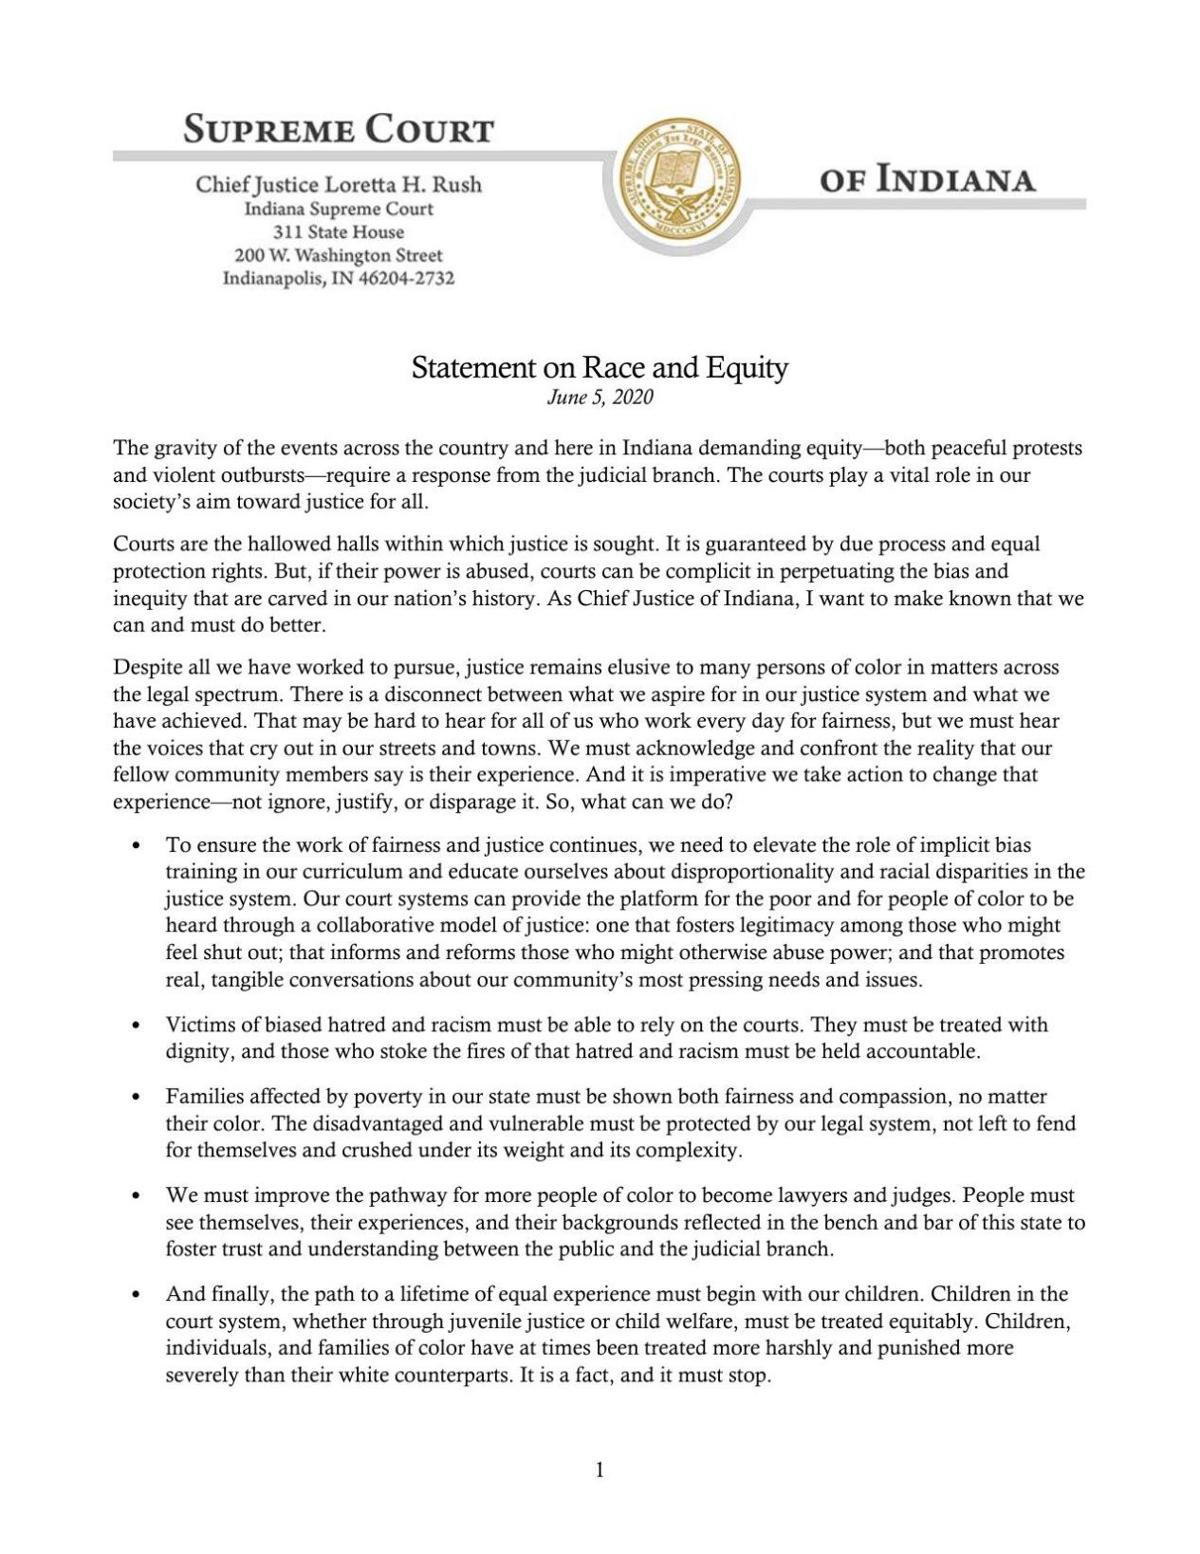 Indiana Chief Justice's Statement on Race and Equity